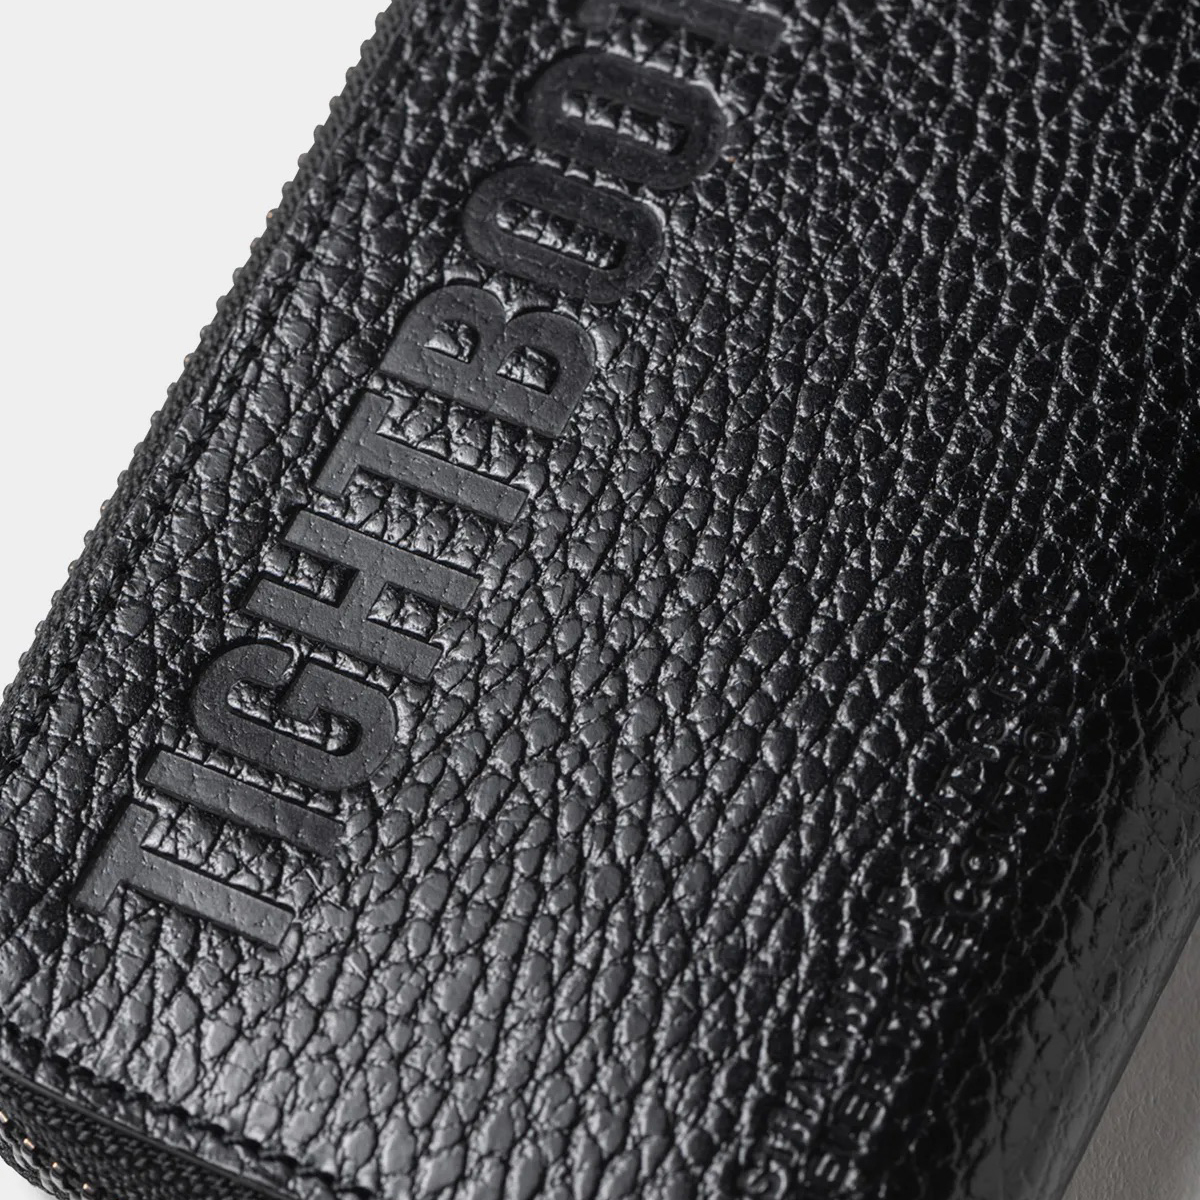 TIGHTBOOTH - Leather Zip Around Wallet - 2 Colors